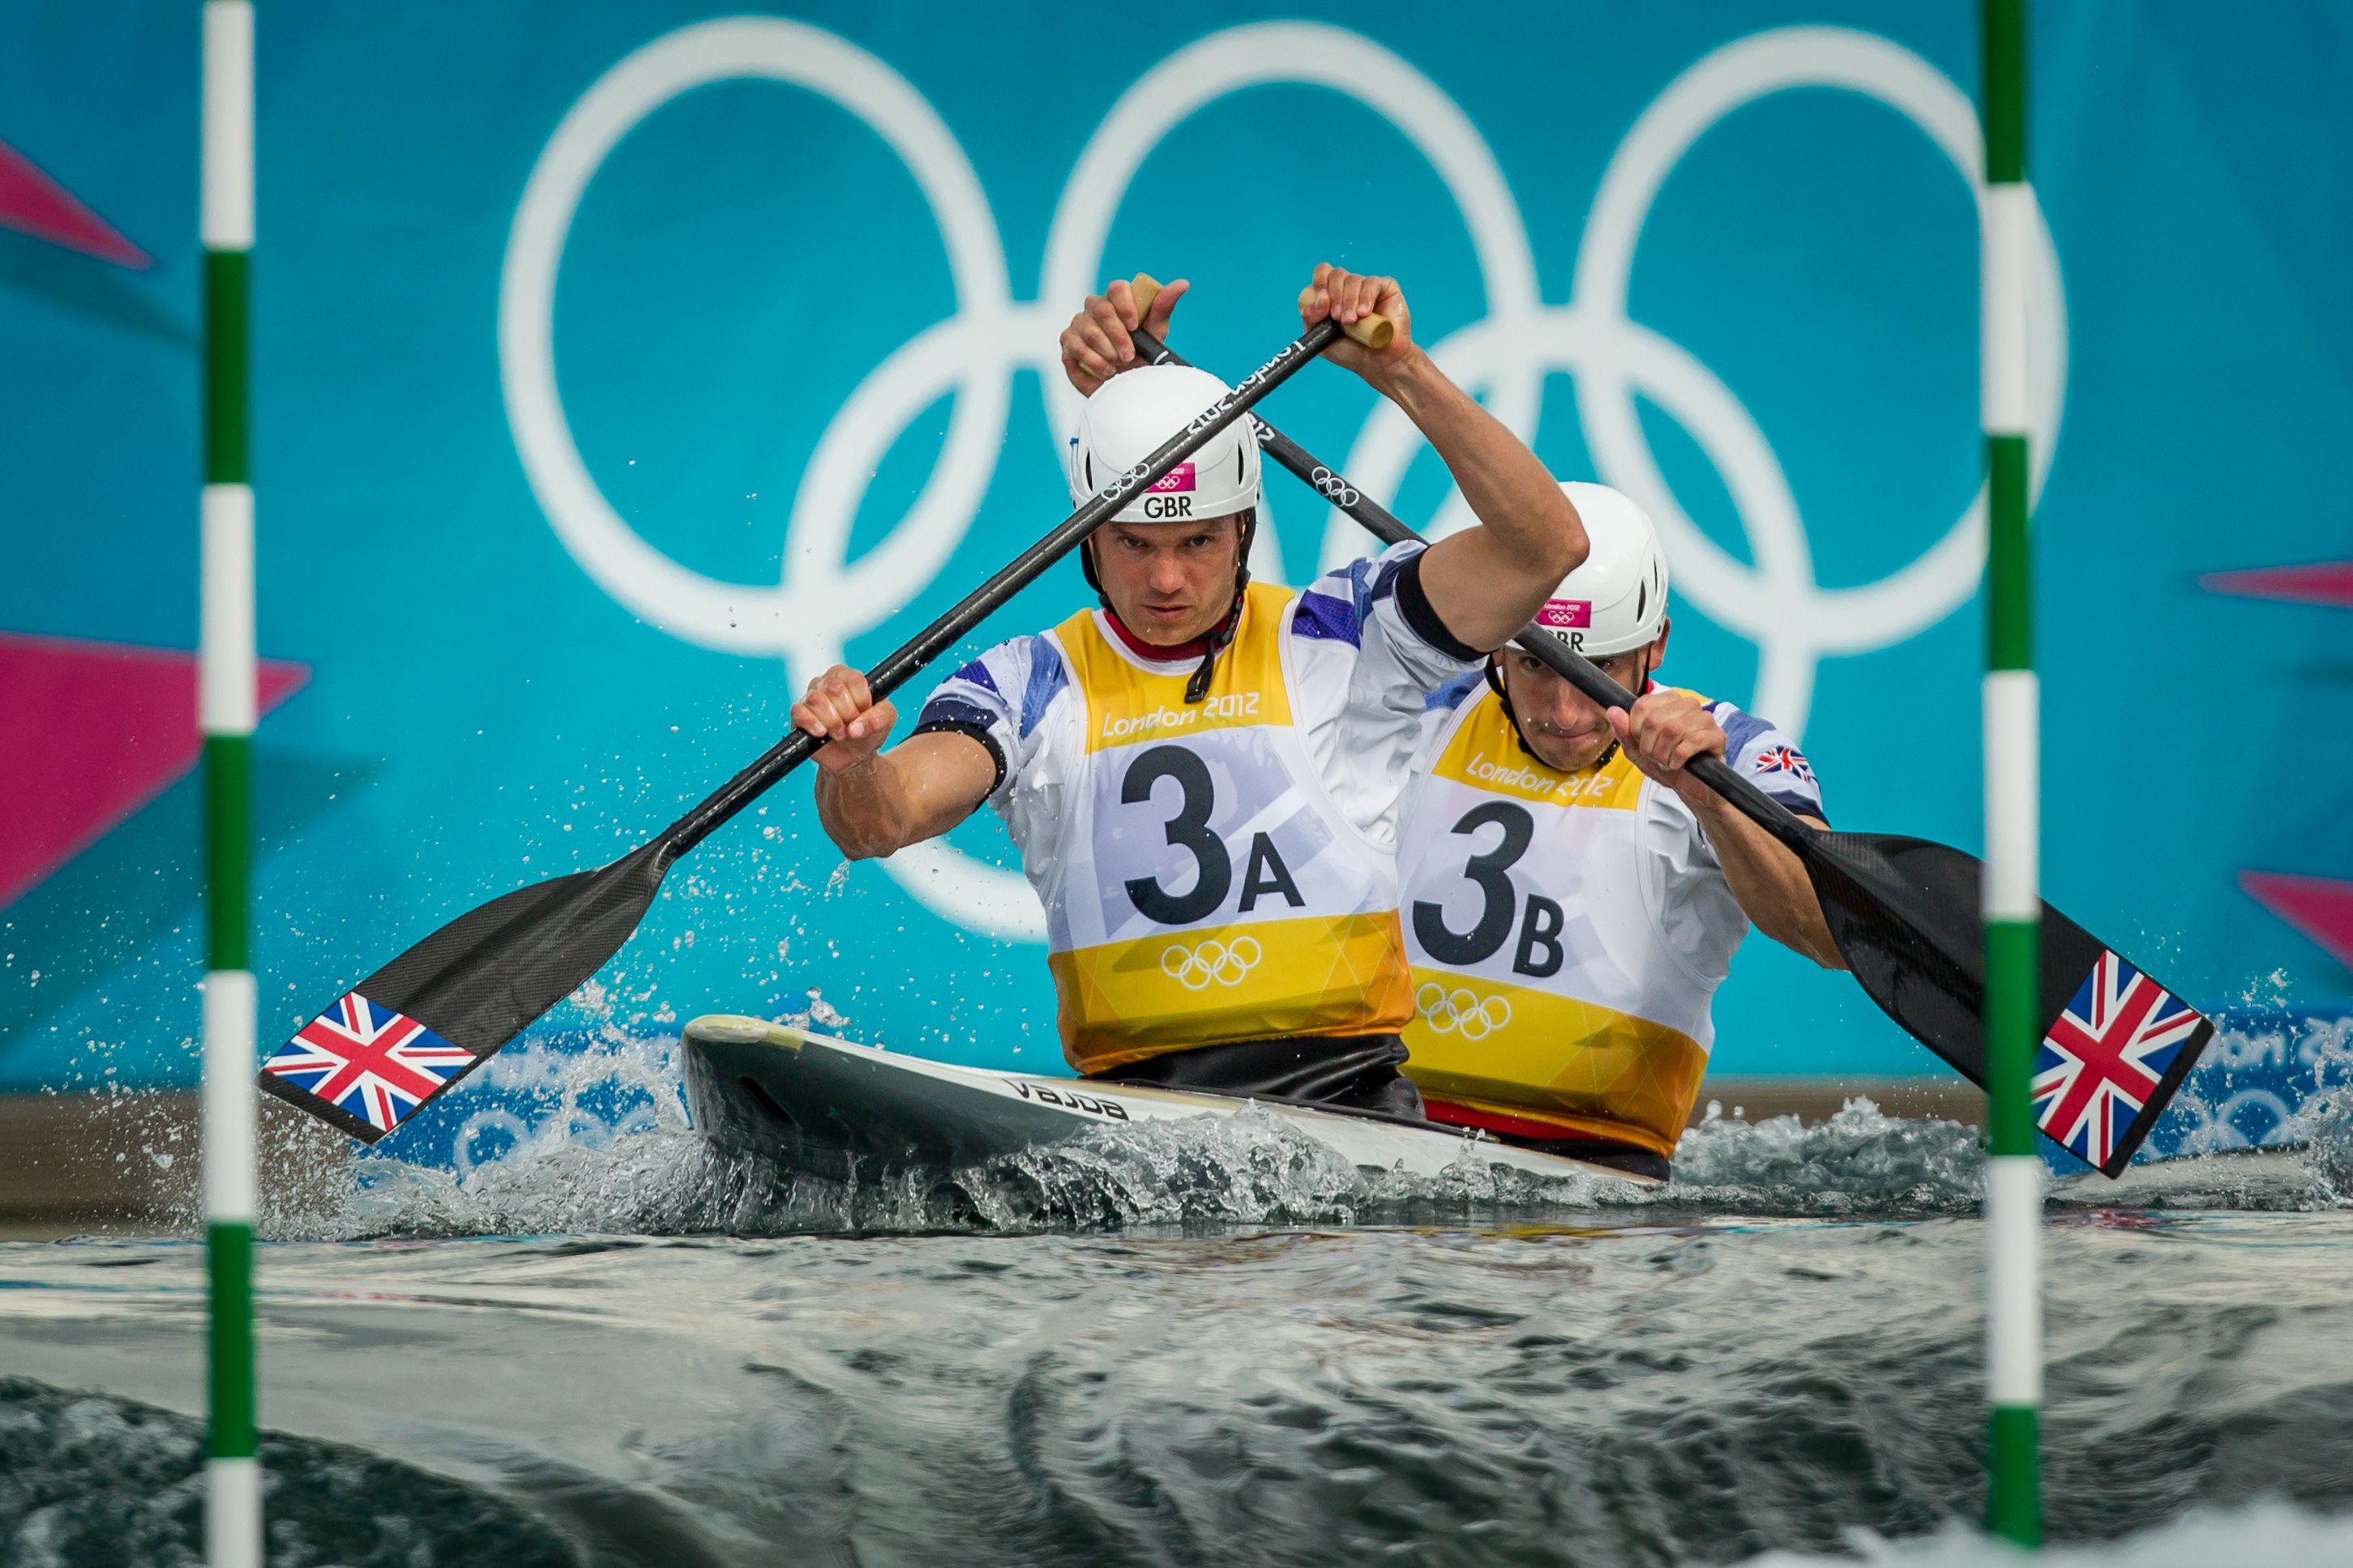 Tim Baillie and his C-2 partner Etienne Stott won the Gold medal at the London 2012 Olympics in the sport of canoe slalom. Photo courtesy AEPhotos,